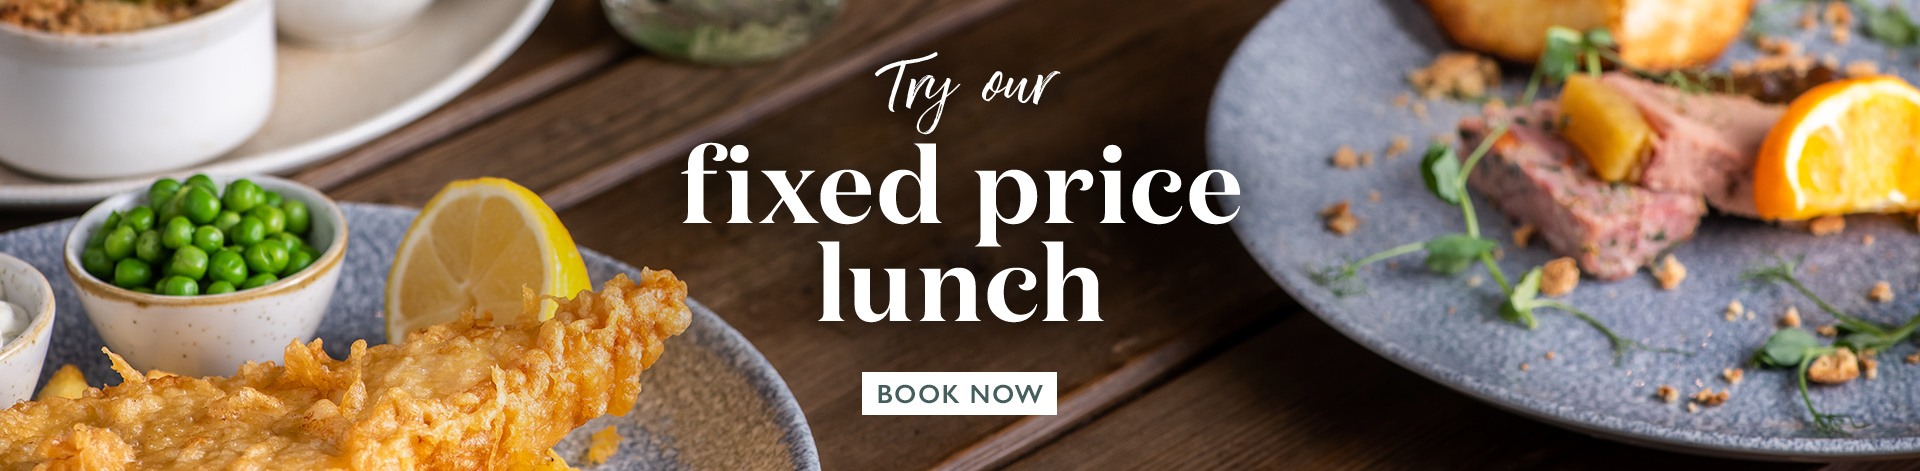 FIXED-PRICE LUNCH